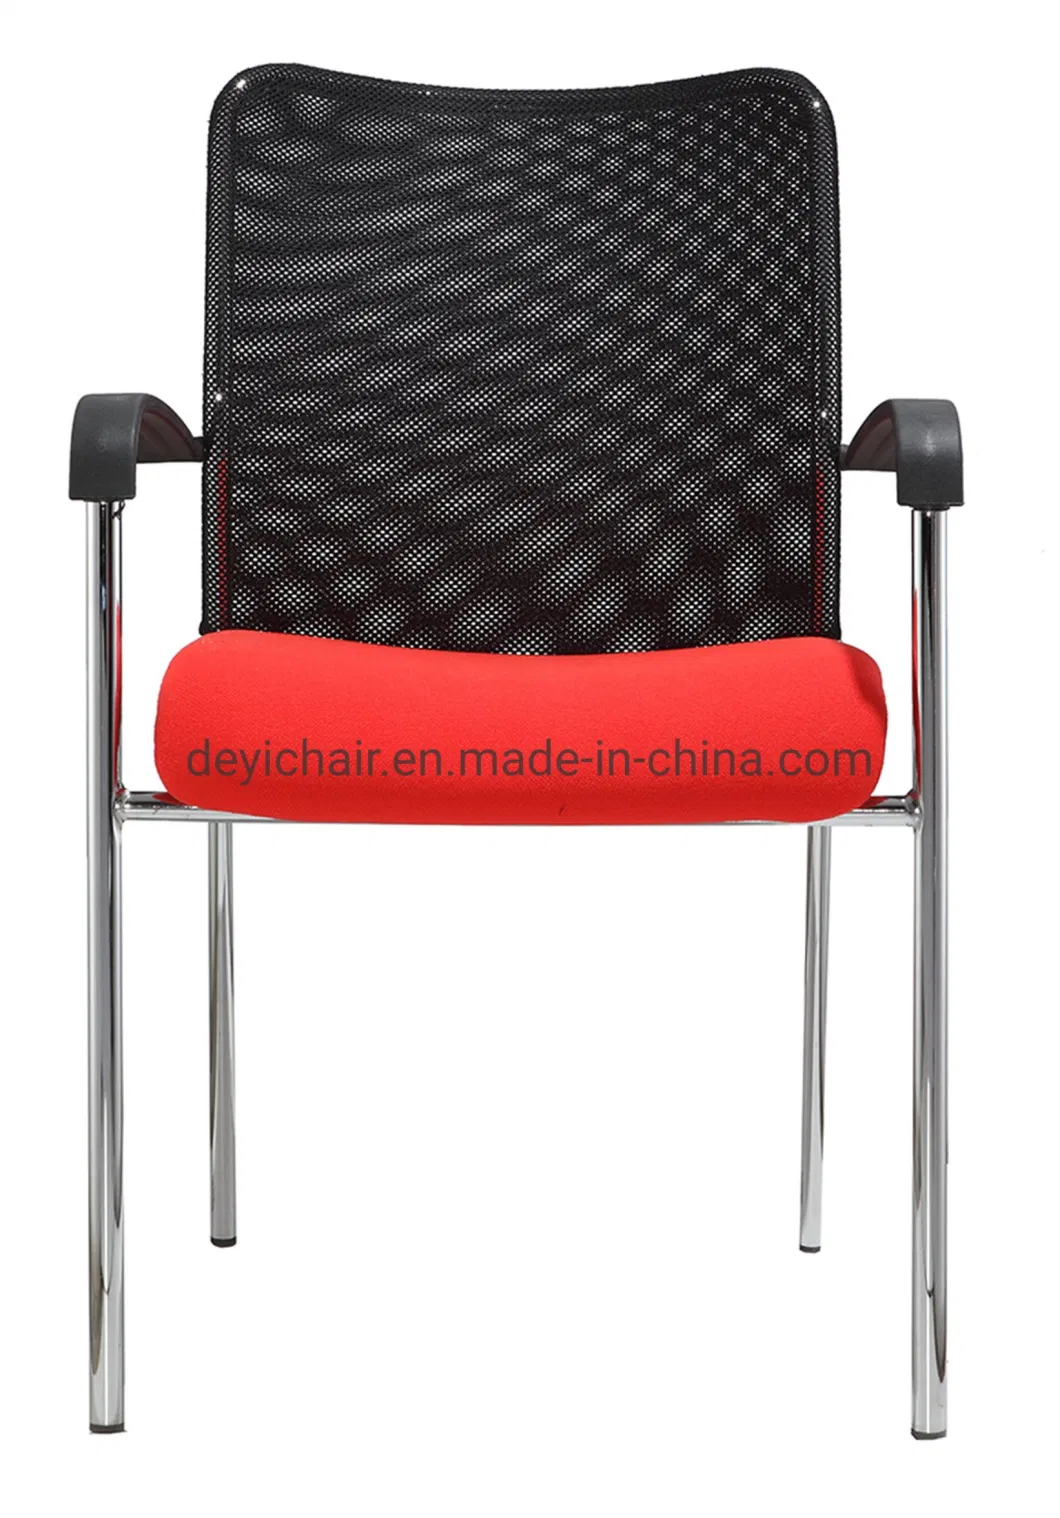 Chrome Frame Four Legs Mesh Back Seat Cover with Table 25mm Tube 1.8mm Thickness Conference Room Office Chair